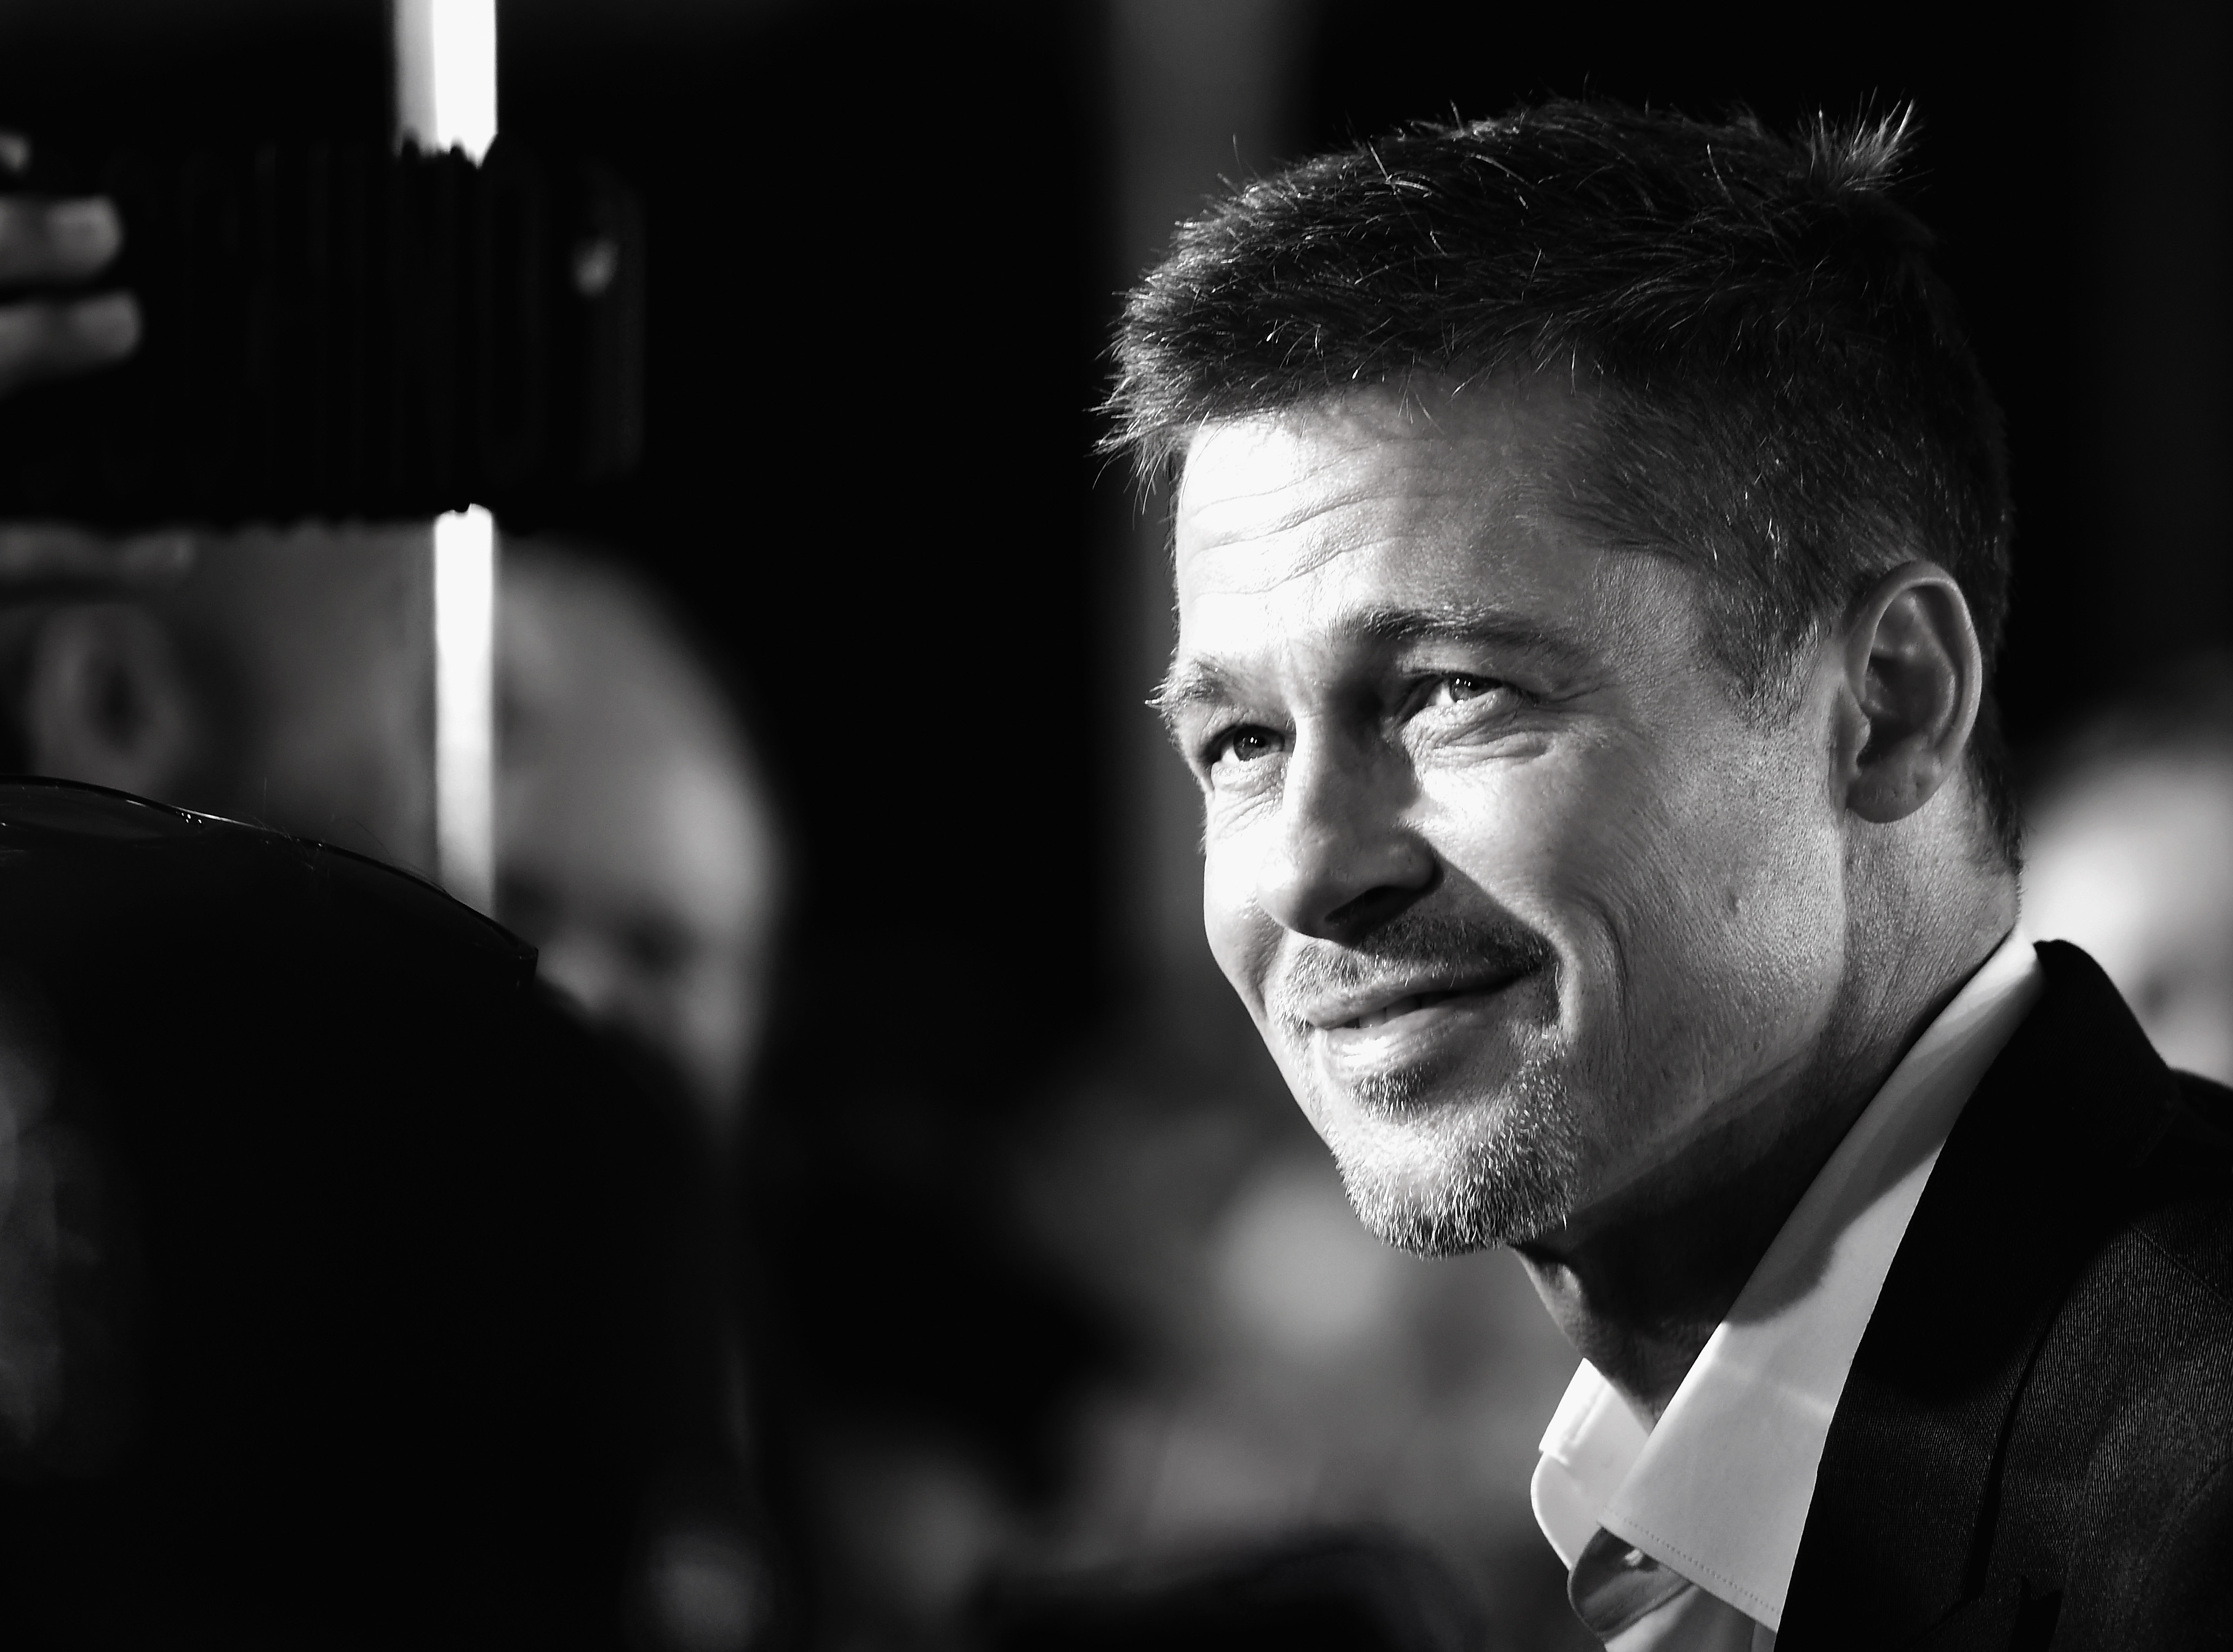 WESTWOOD, CA - NOVEMBER 09: (EDITORS NOTE: This image has been converted to black and white.) Actor Brad Pitt attends the fan event for Paramount Pictures' 'Allied' at Regency Village Theatre on November 9, 2016 in Westwood, California.   Frazer Harrison/Getty Images/AFP